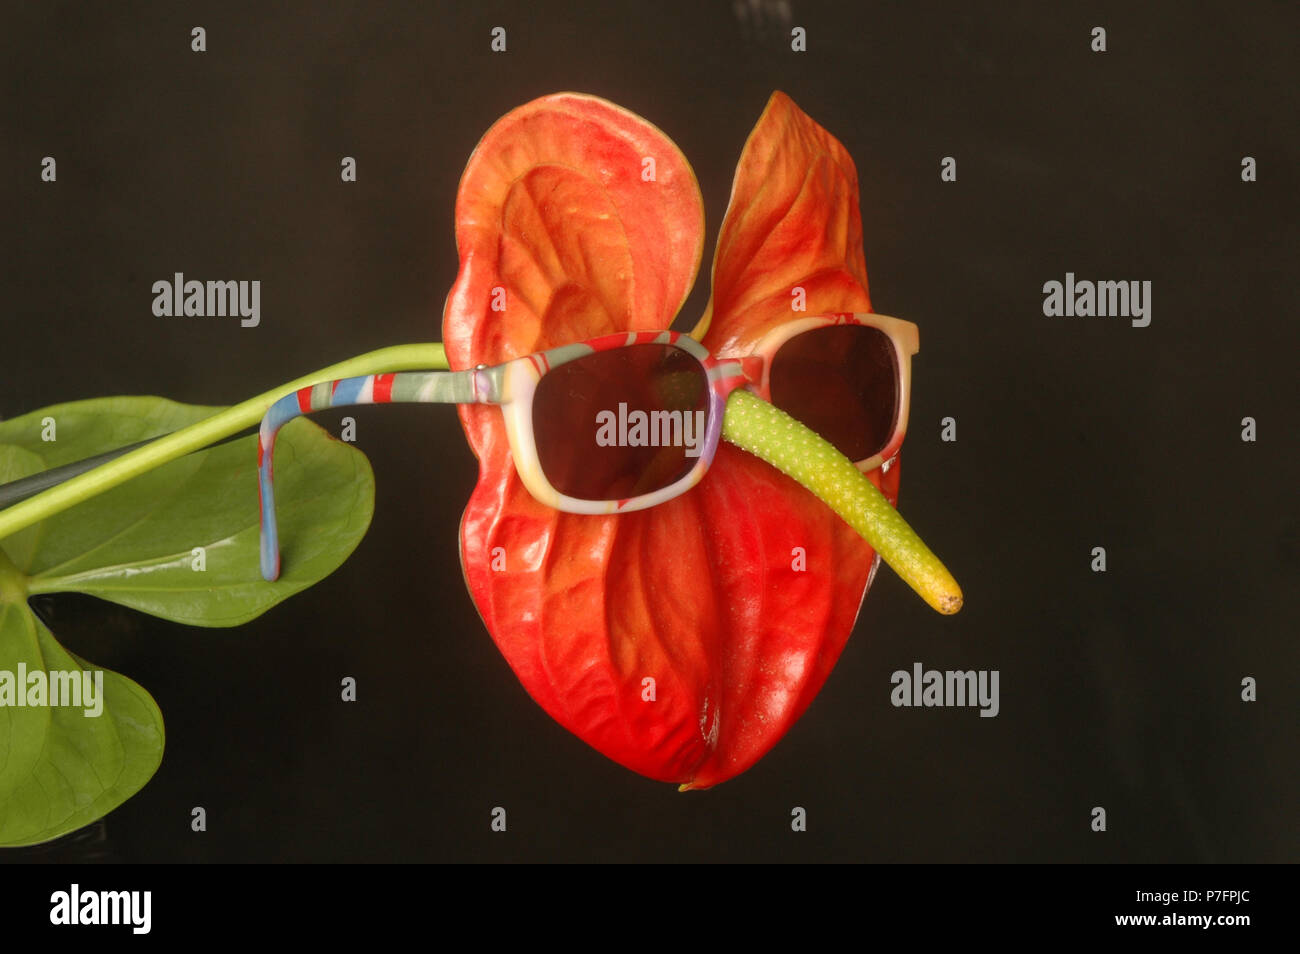 Anthurium flower with sunglasses Stock Photo